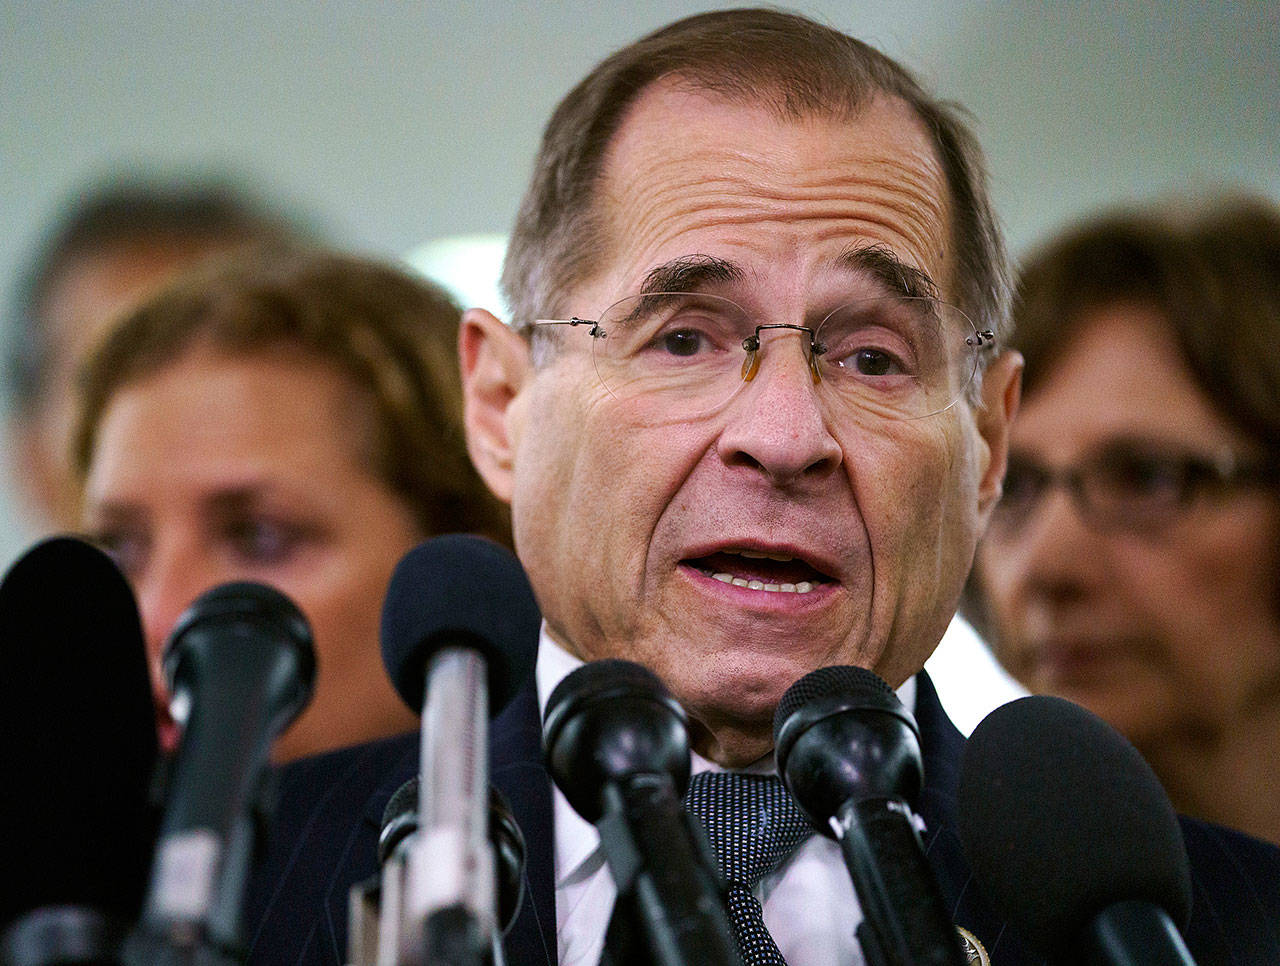 House Judiciary Committee ranking member Jerry Nadler, D-N.Y., says he believes it would be an “impeachable offense” if it’s proven that President Donald Trump directed illegal hush-money payments to women during the 2016 campaign. (Associated Press)